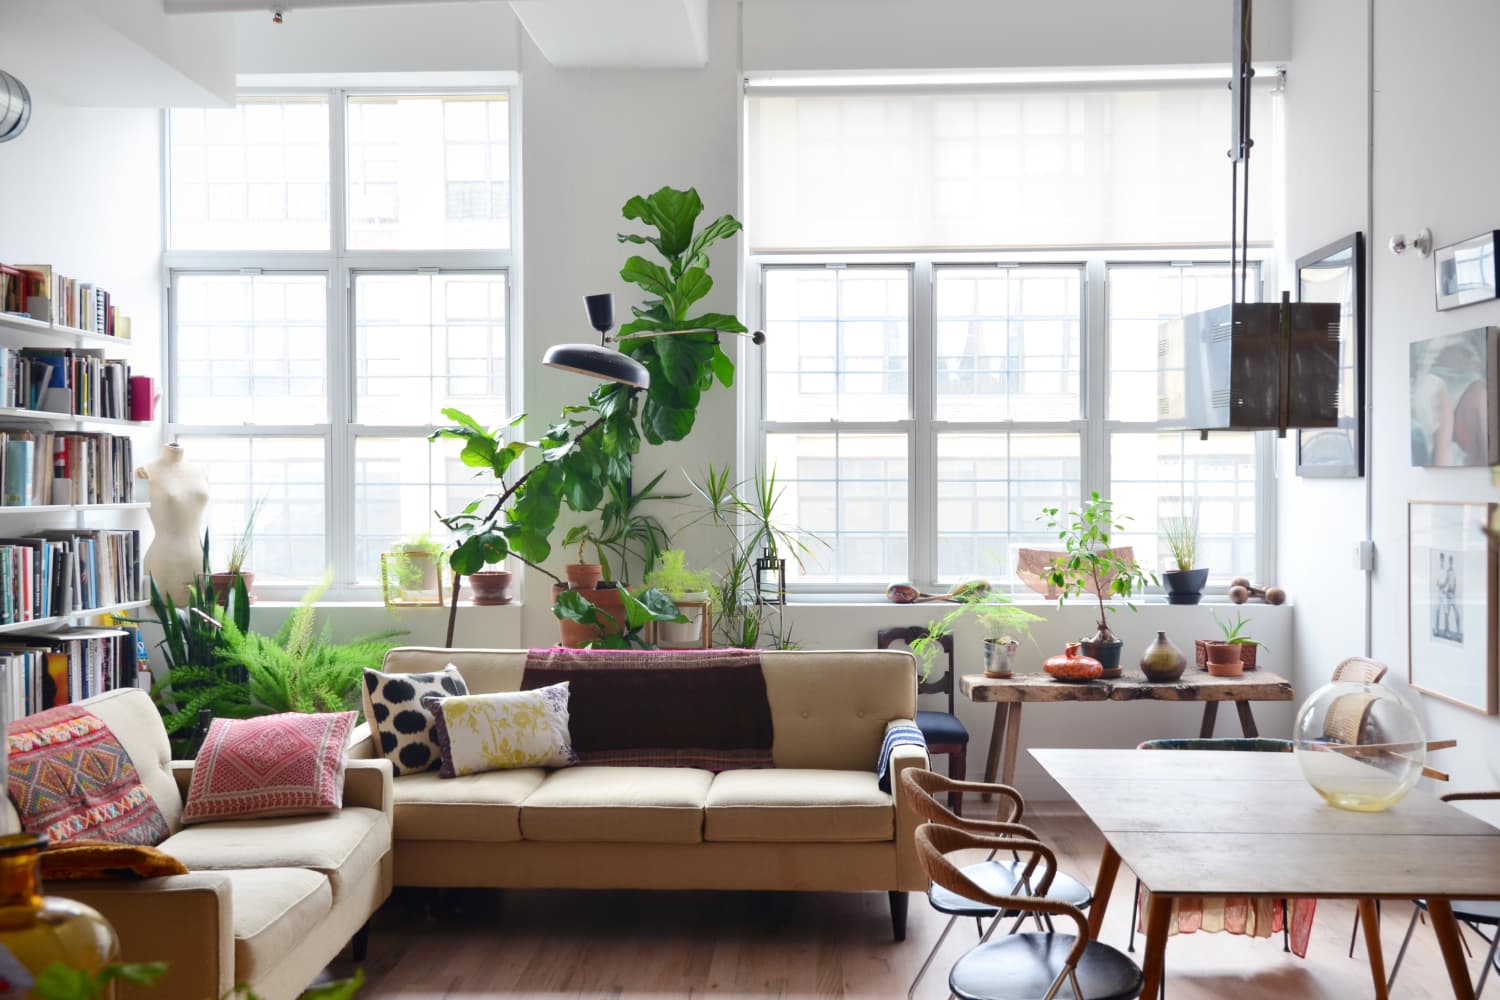 New York Home Tour: A Raw, Eclectic Brooklyn Loft | Apartment Therapy